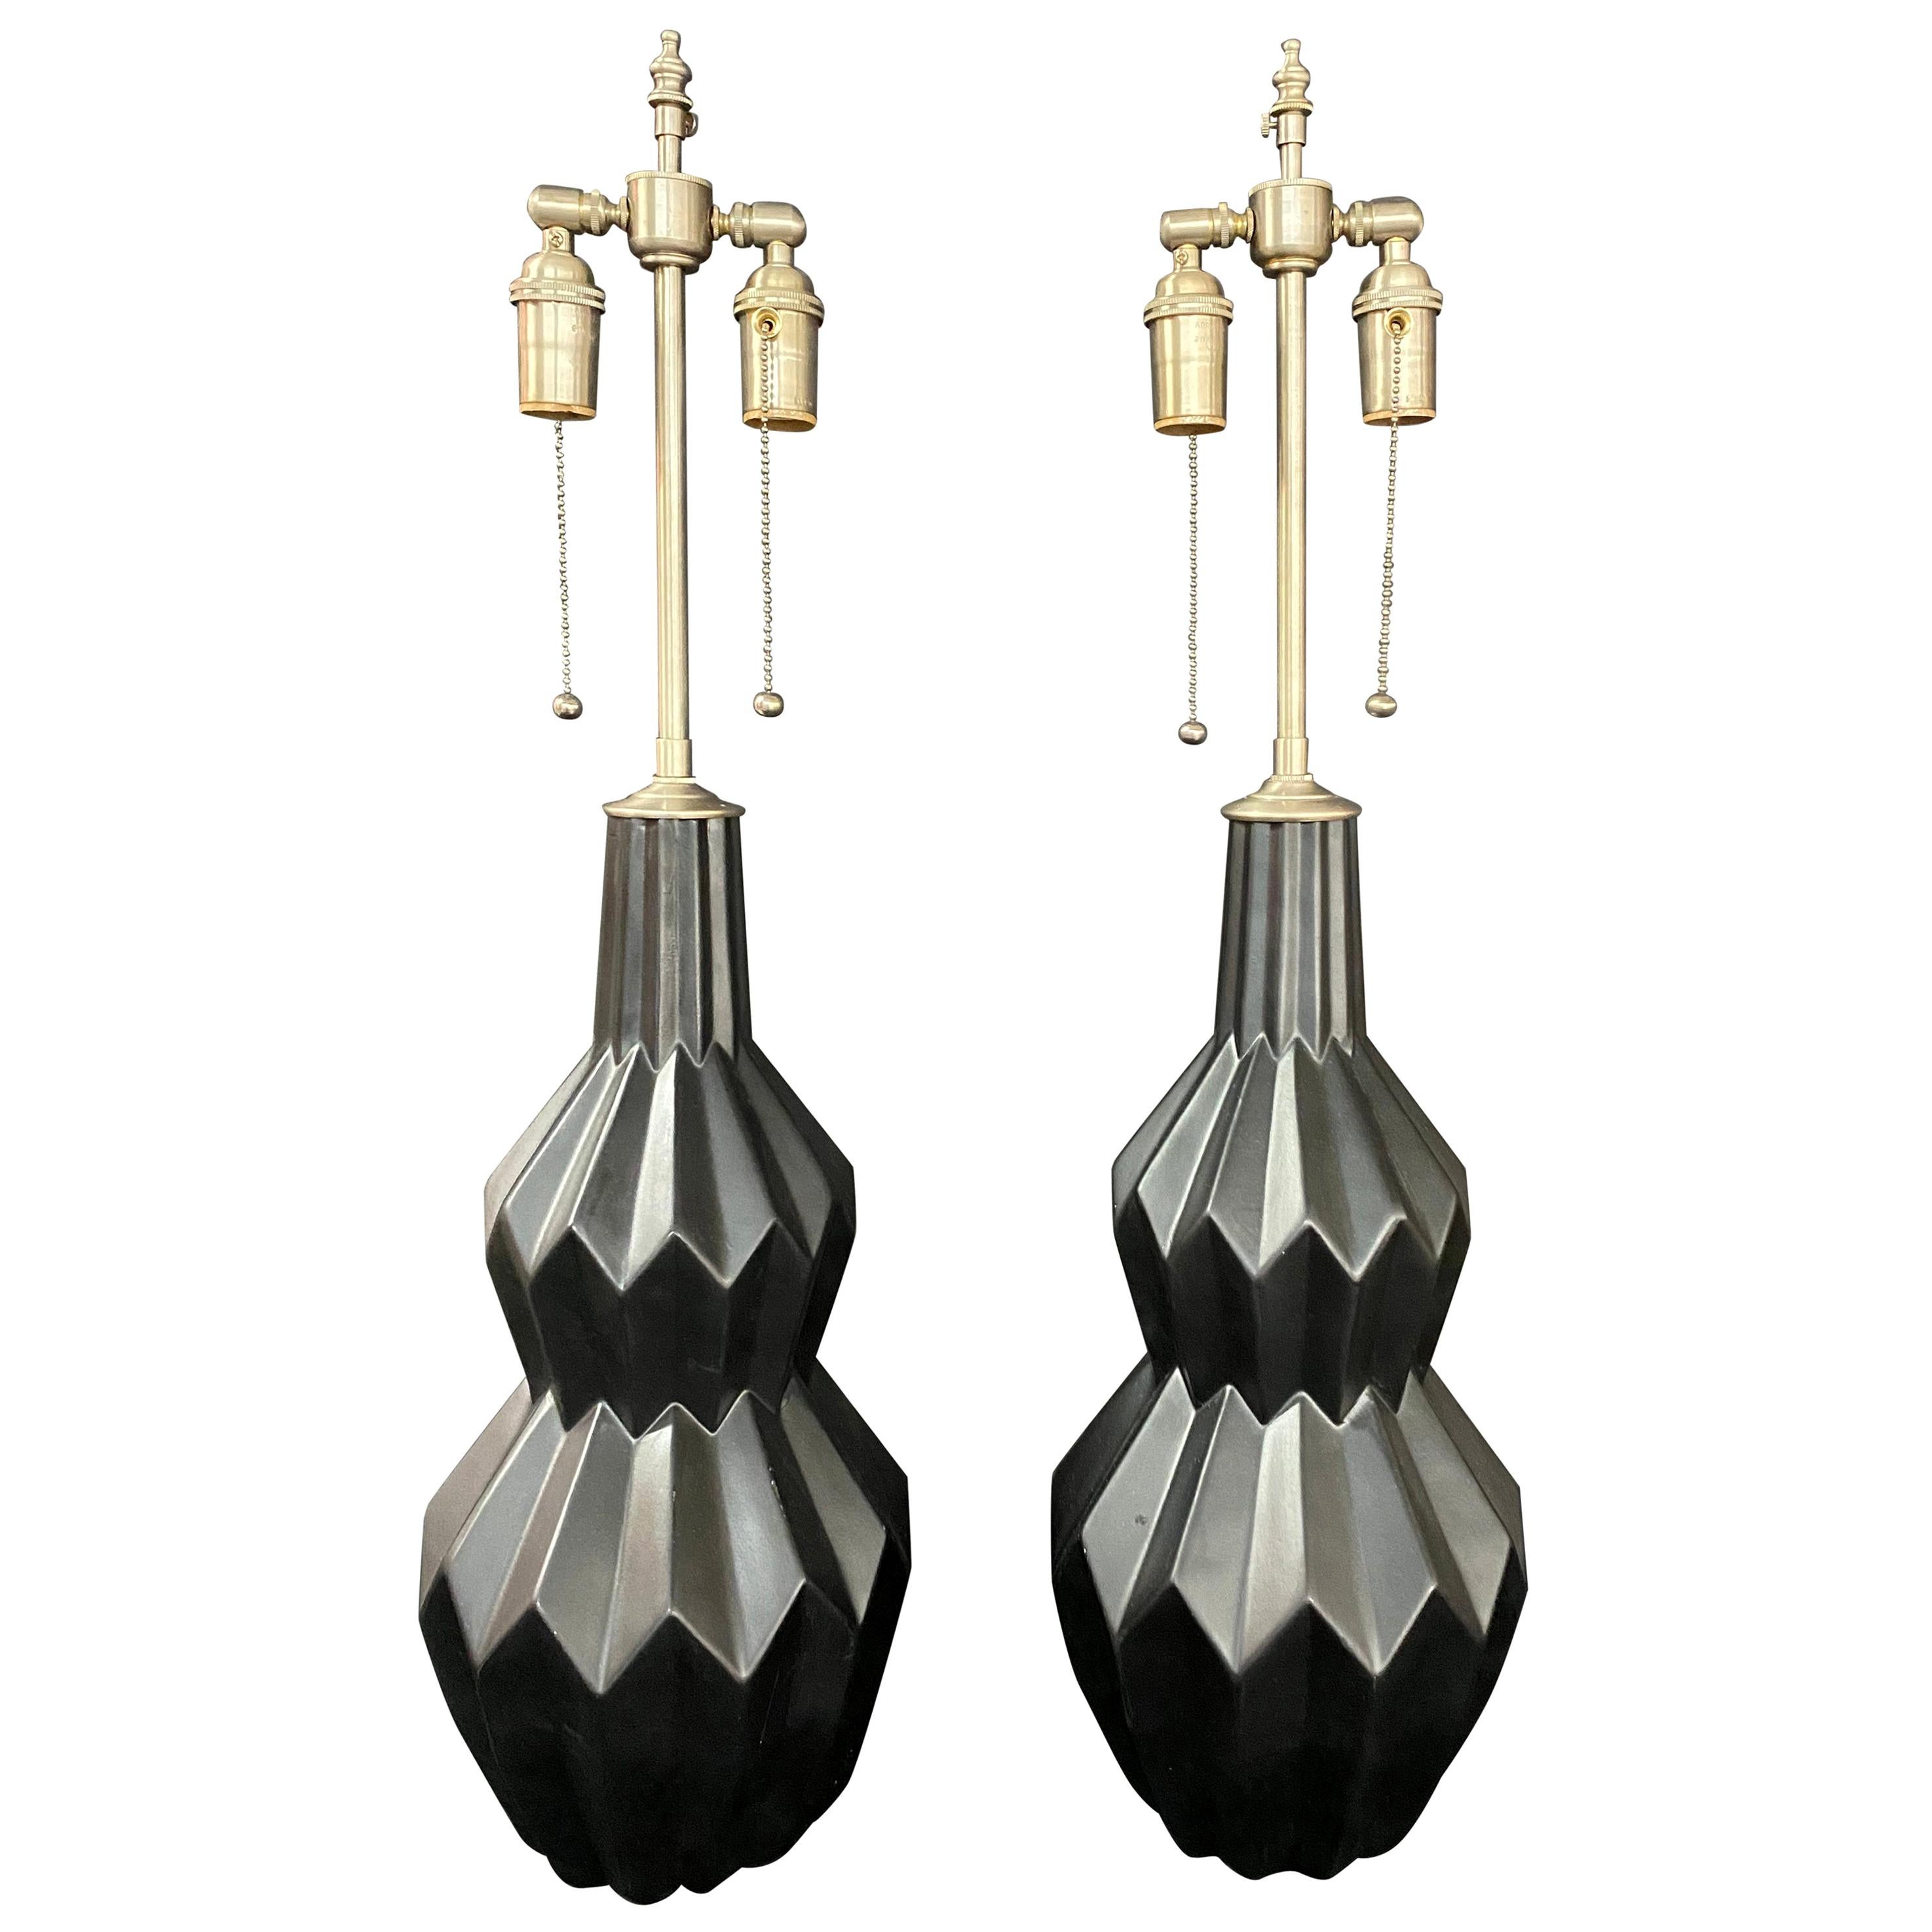 Pair of Black Charcoal Matte Diamond Shaped Table Lamps For Sale